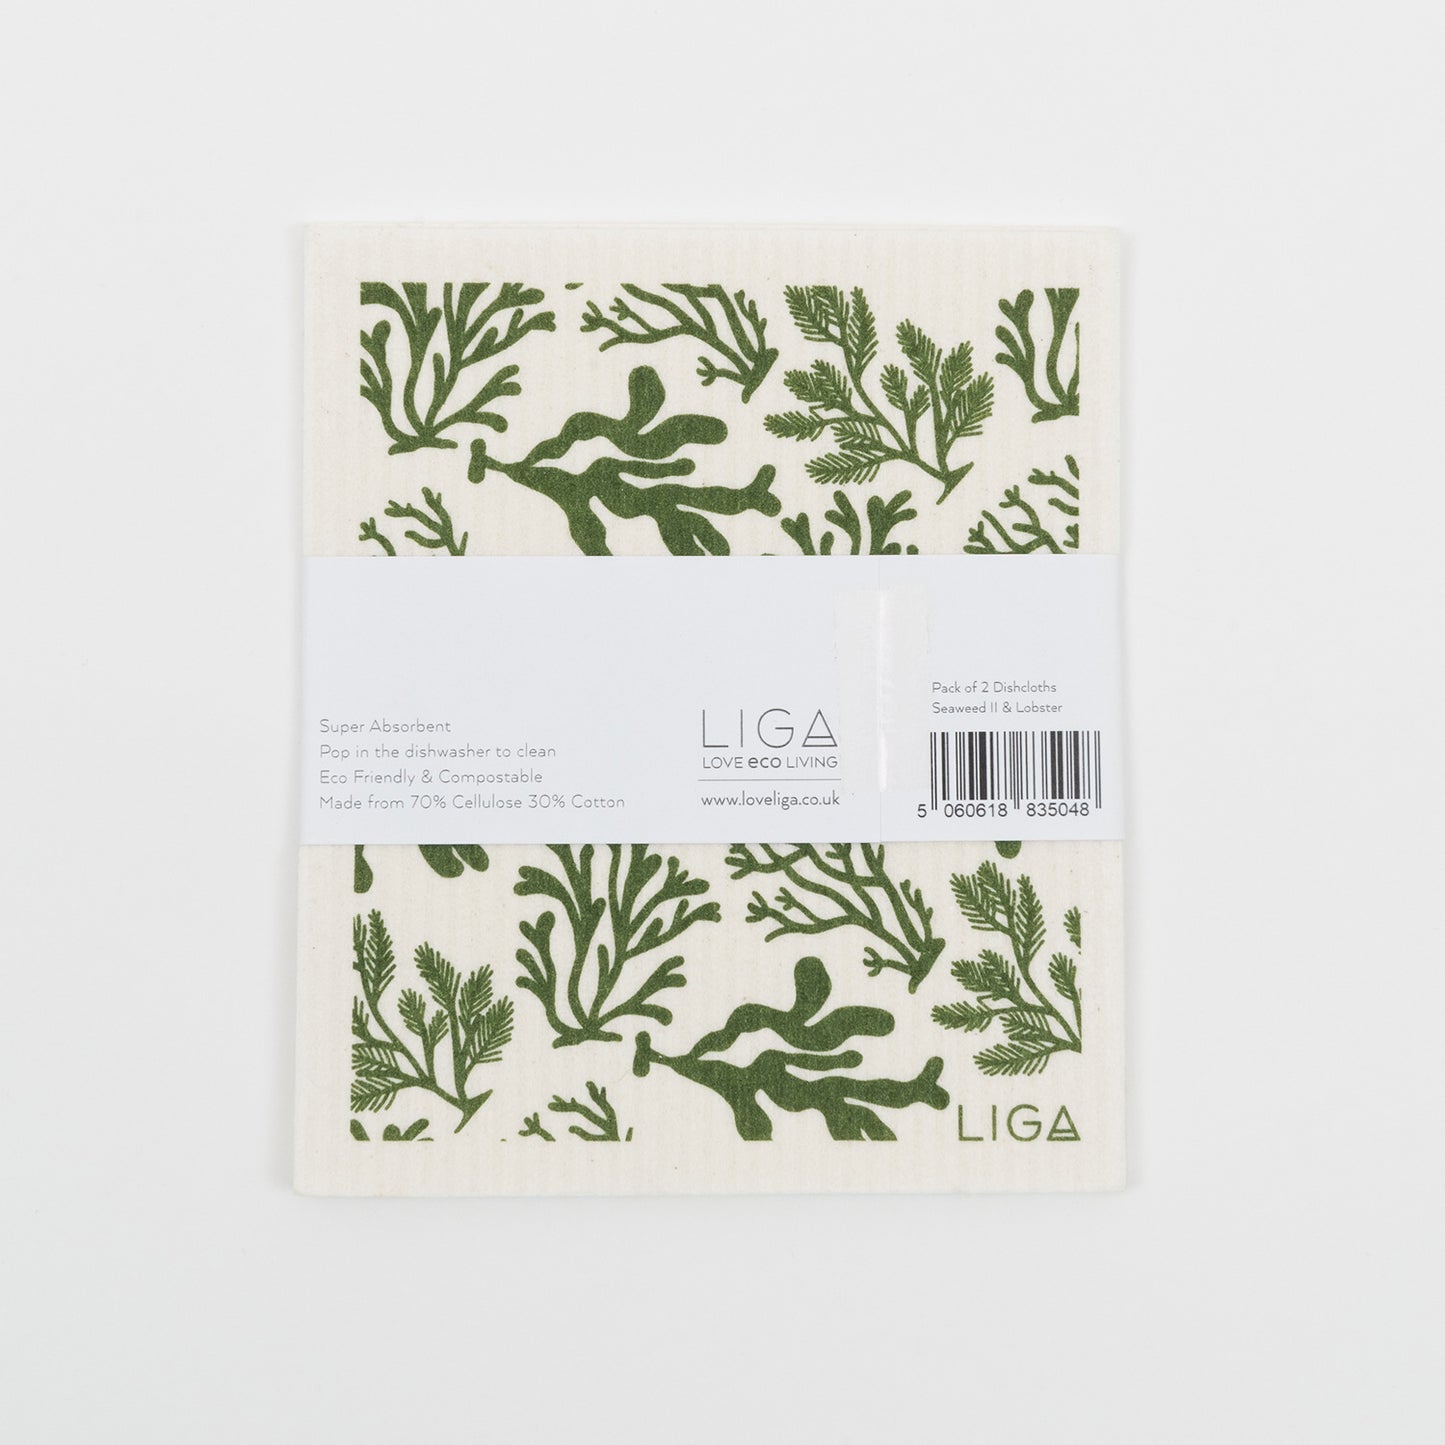 Seaweed pattern on a light cream background with back of the packaging.